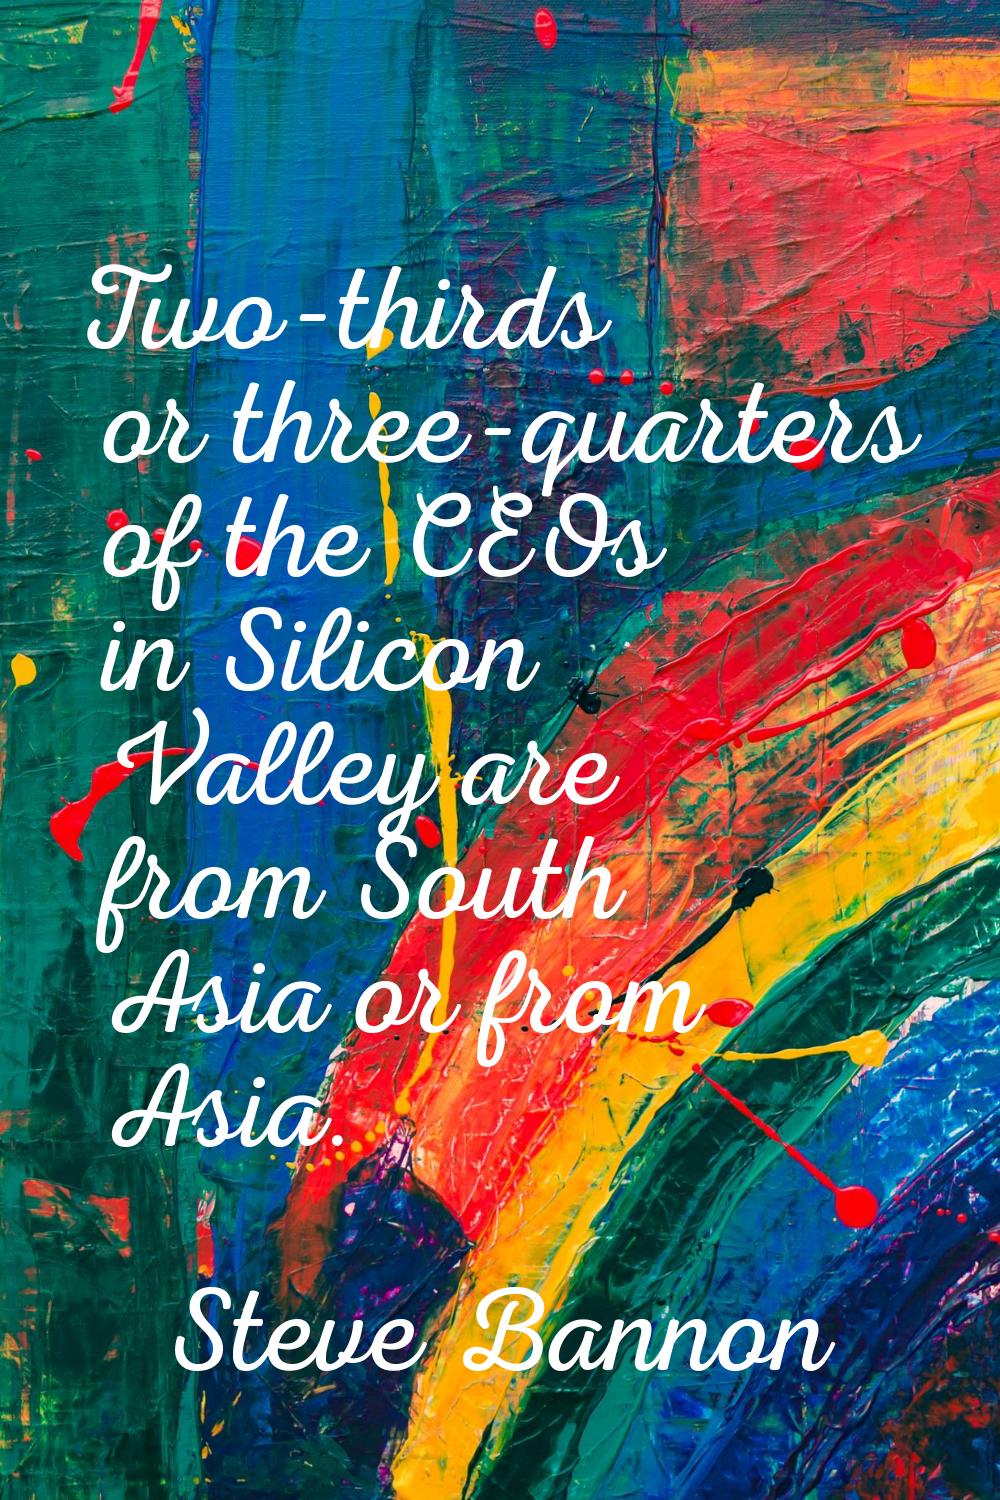 Two-thirds or three-quarters of the CEOs in Silicon Valley are from South Asia or from Asia.